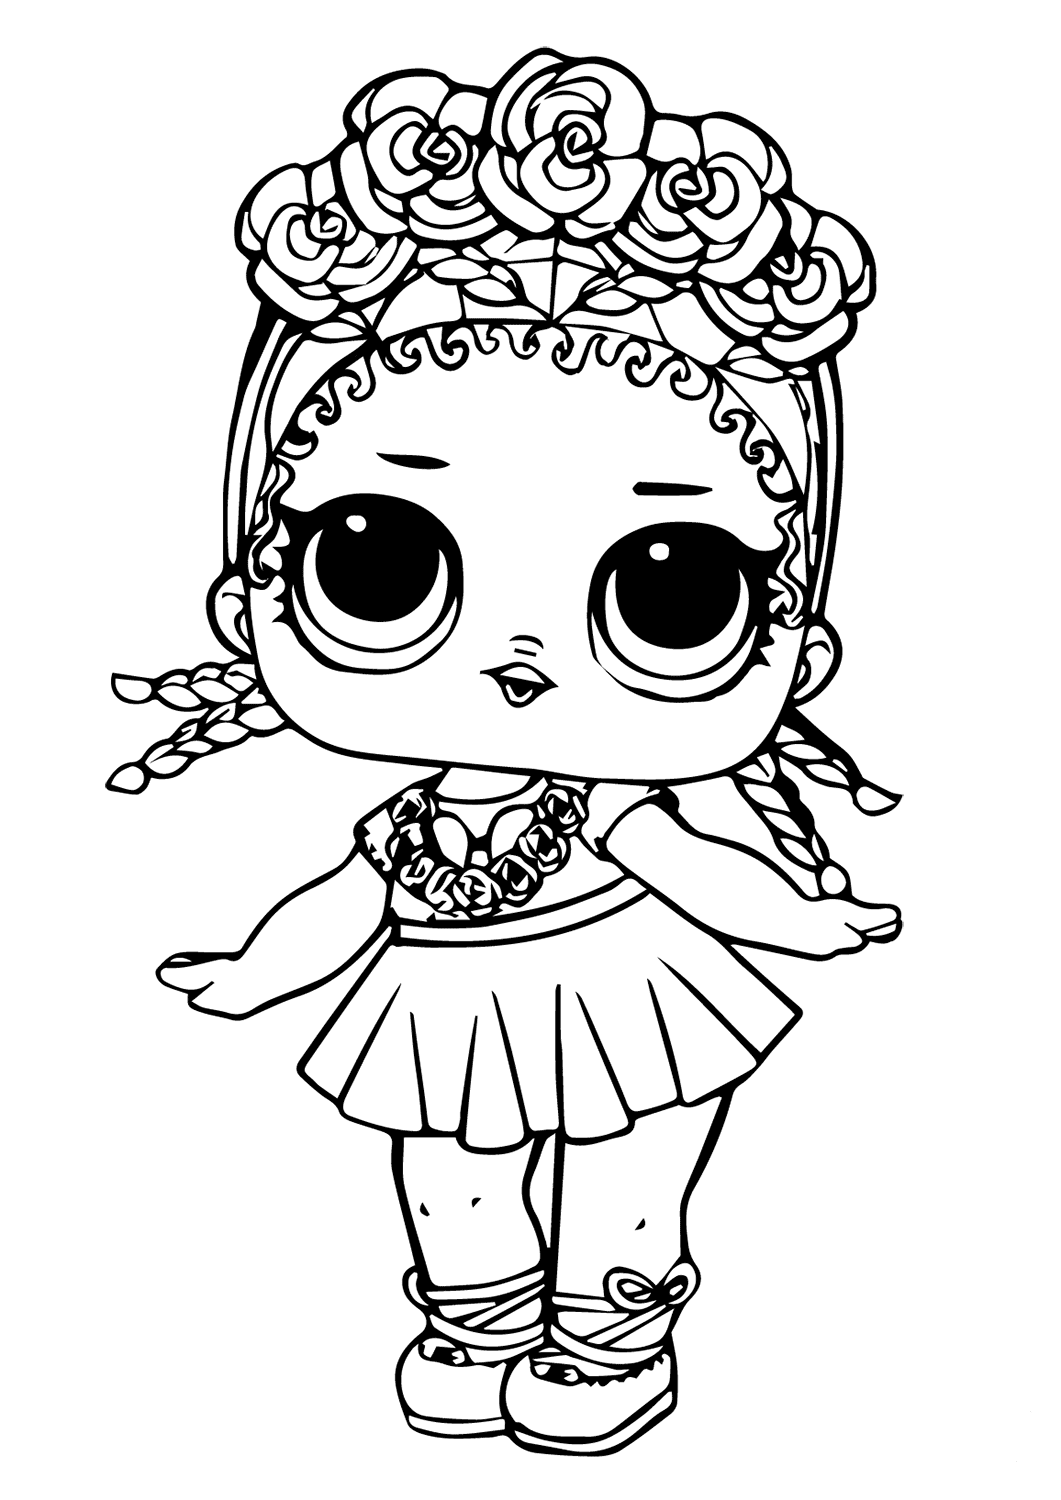 Lol Surprise Doll Coloring Sheets Coconut Q T Unicorn Coloring Pages Cute Coloring Pa